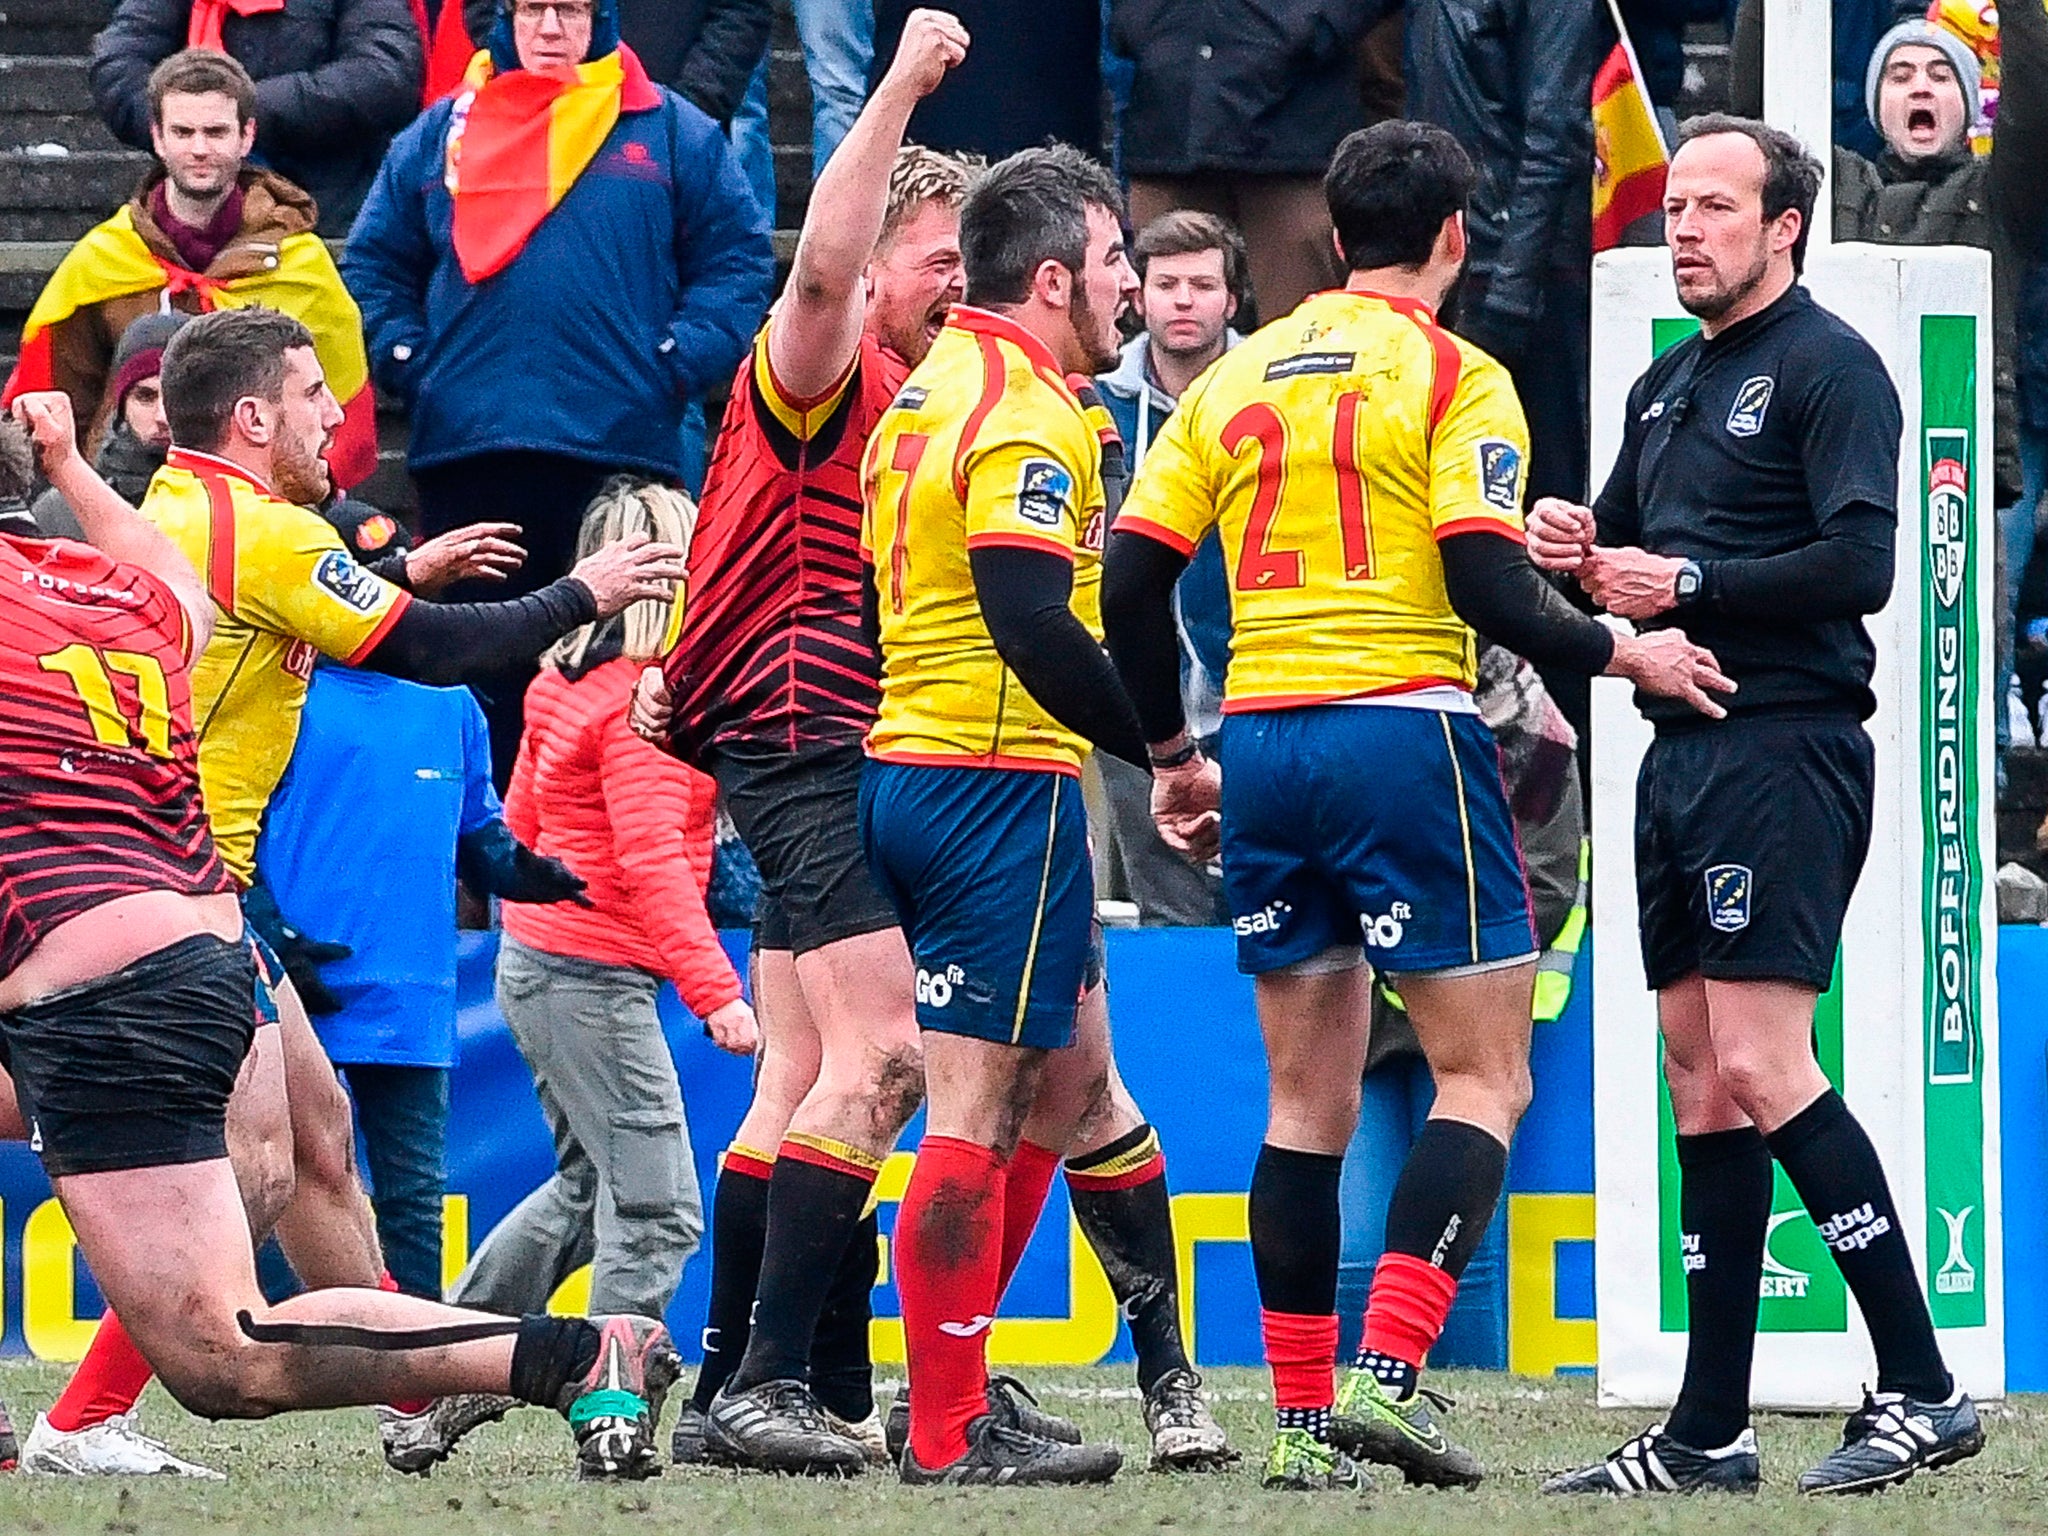 World Rugby are looking into the process of appointing Romanian referee Vlad Iordachescu for Spain's match